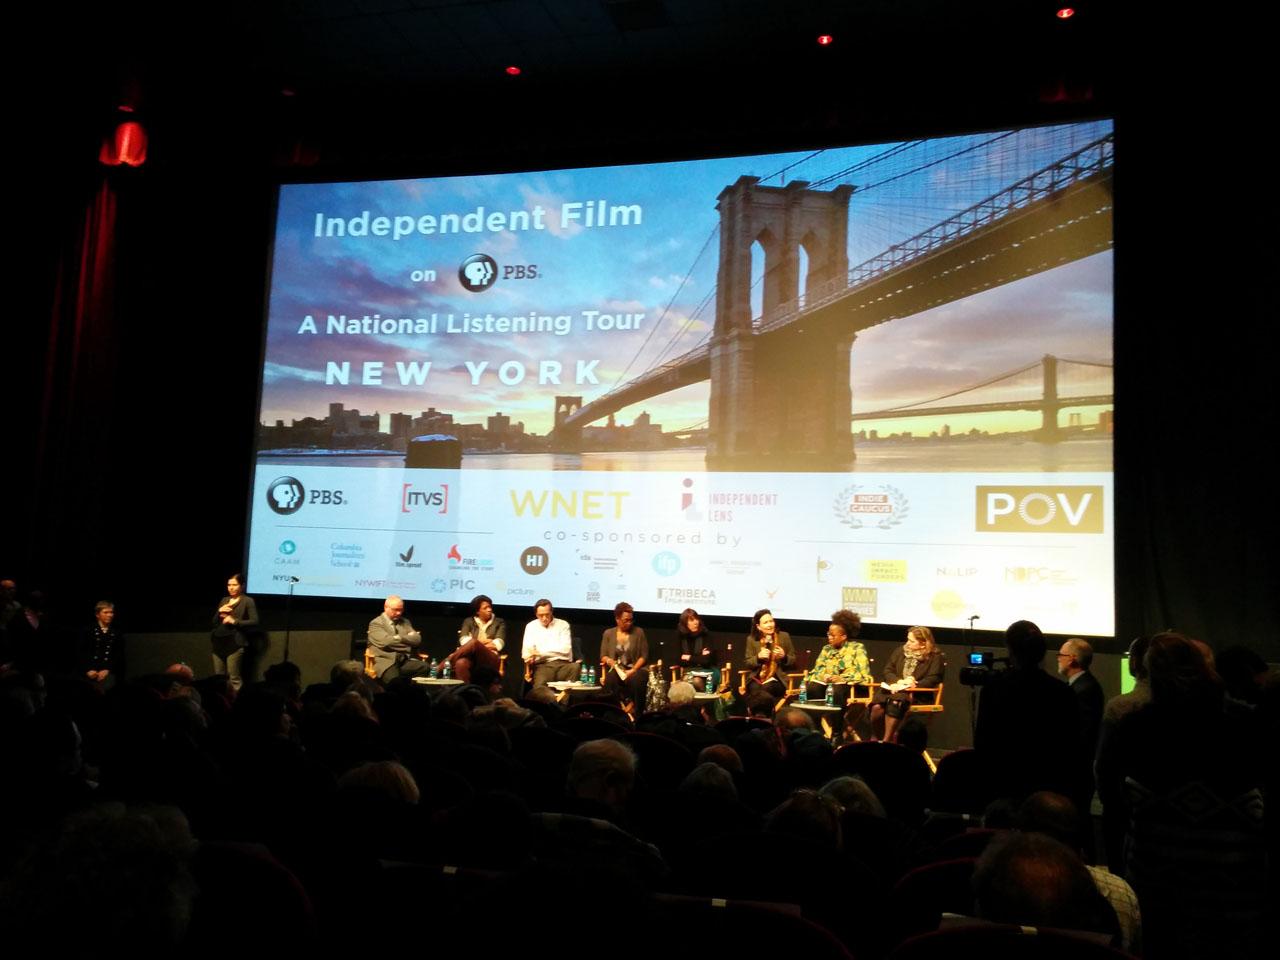 An auditorium with a large screen on the stage. On the screen is an image of Brooklyn Bridge and the words “Independent Film on PBS A National Listening Tour New York” in white text. On stage a panel of people of various races sit in a row, some leaning over in discussion with one another.